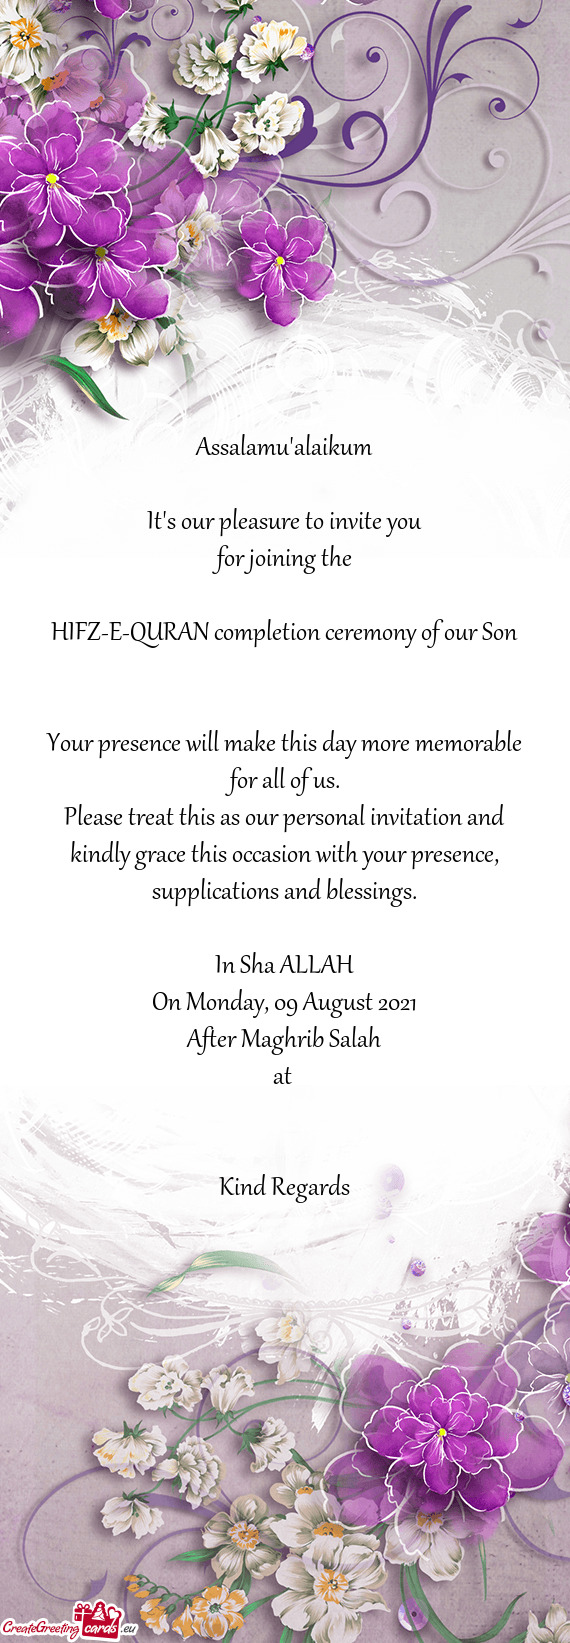 Please treat this as our personal invitation and kindly grace this occasion with your presence, supp